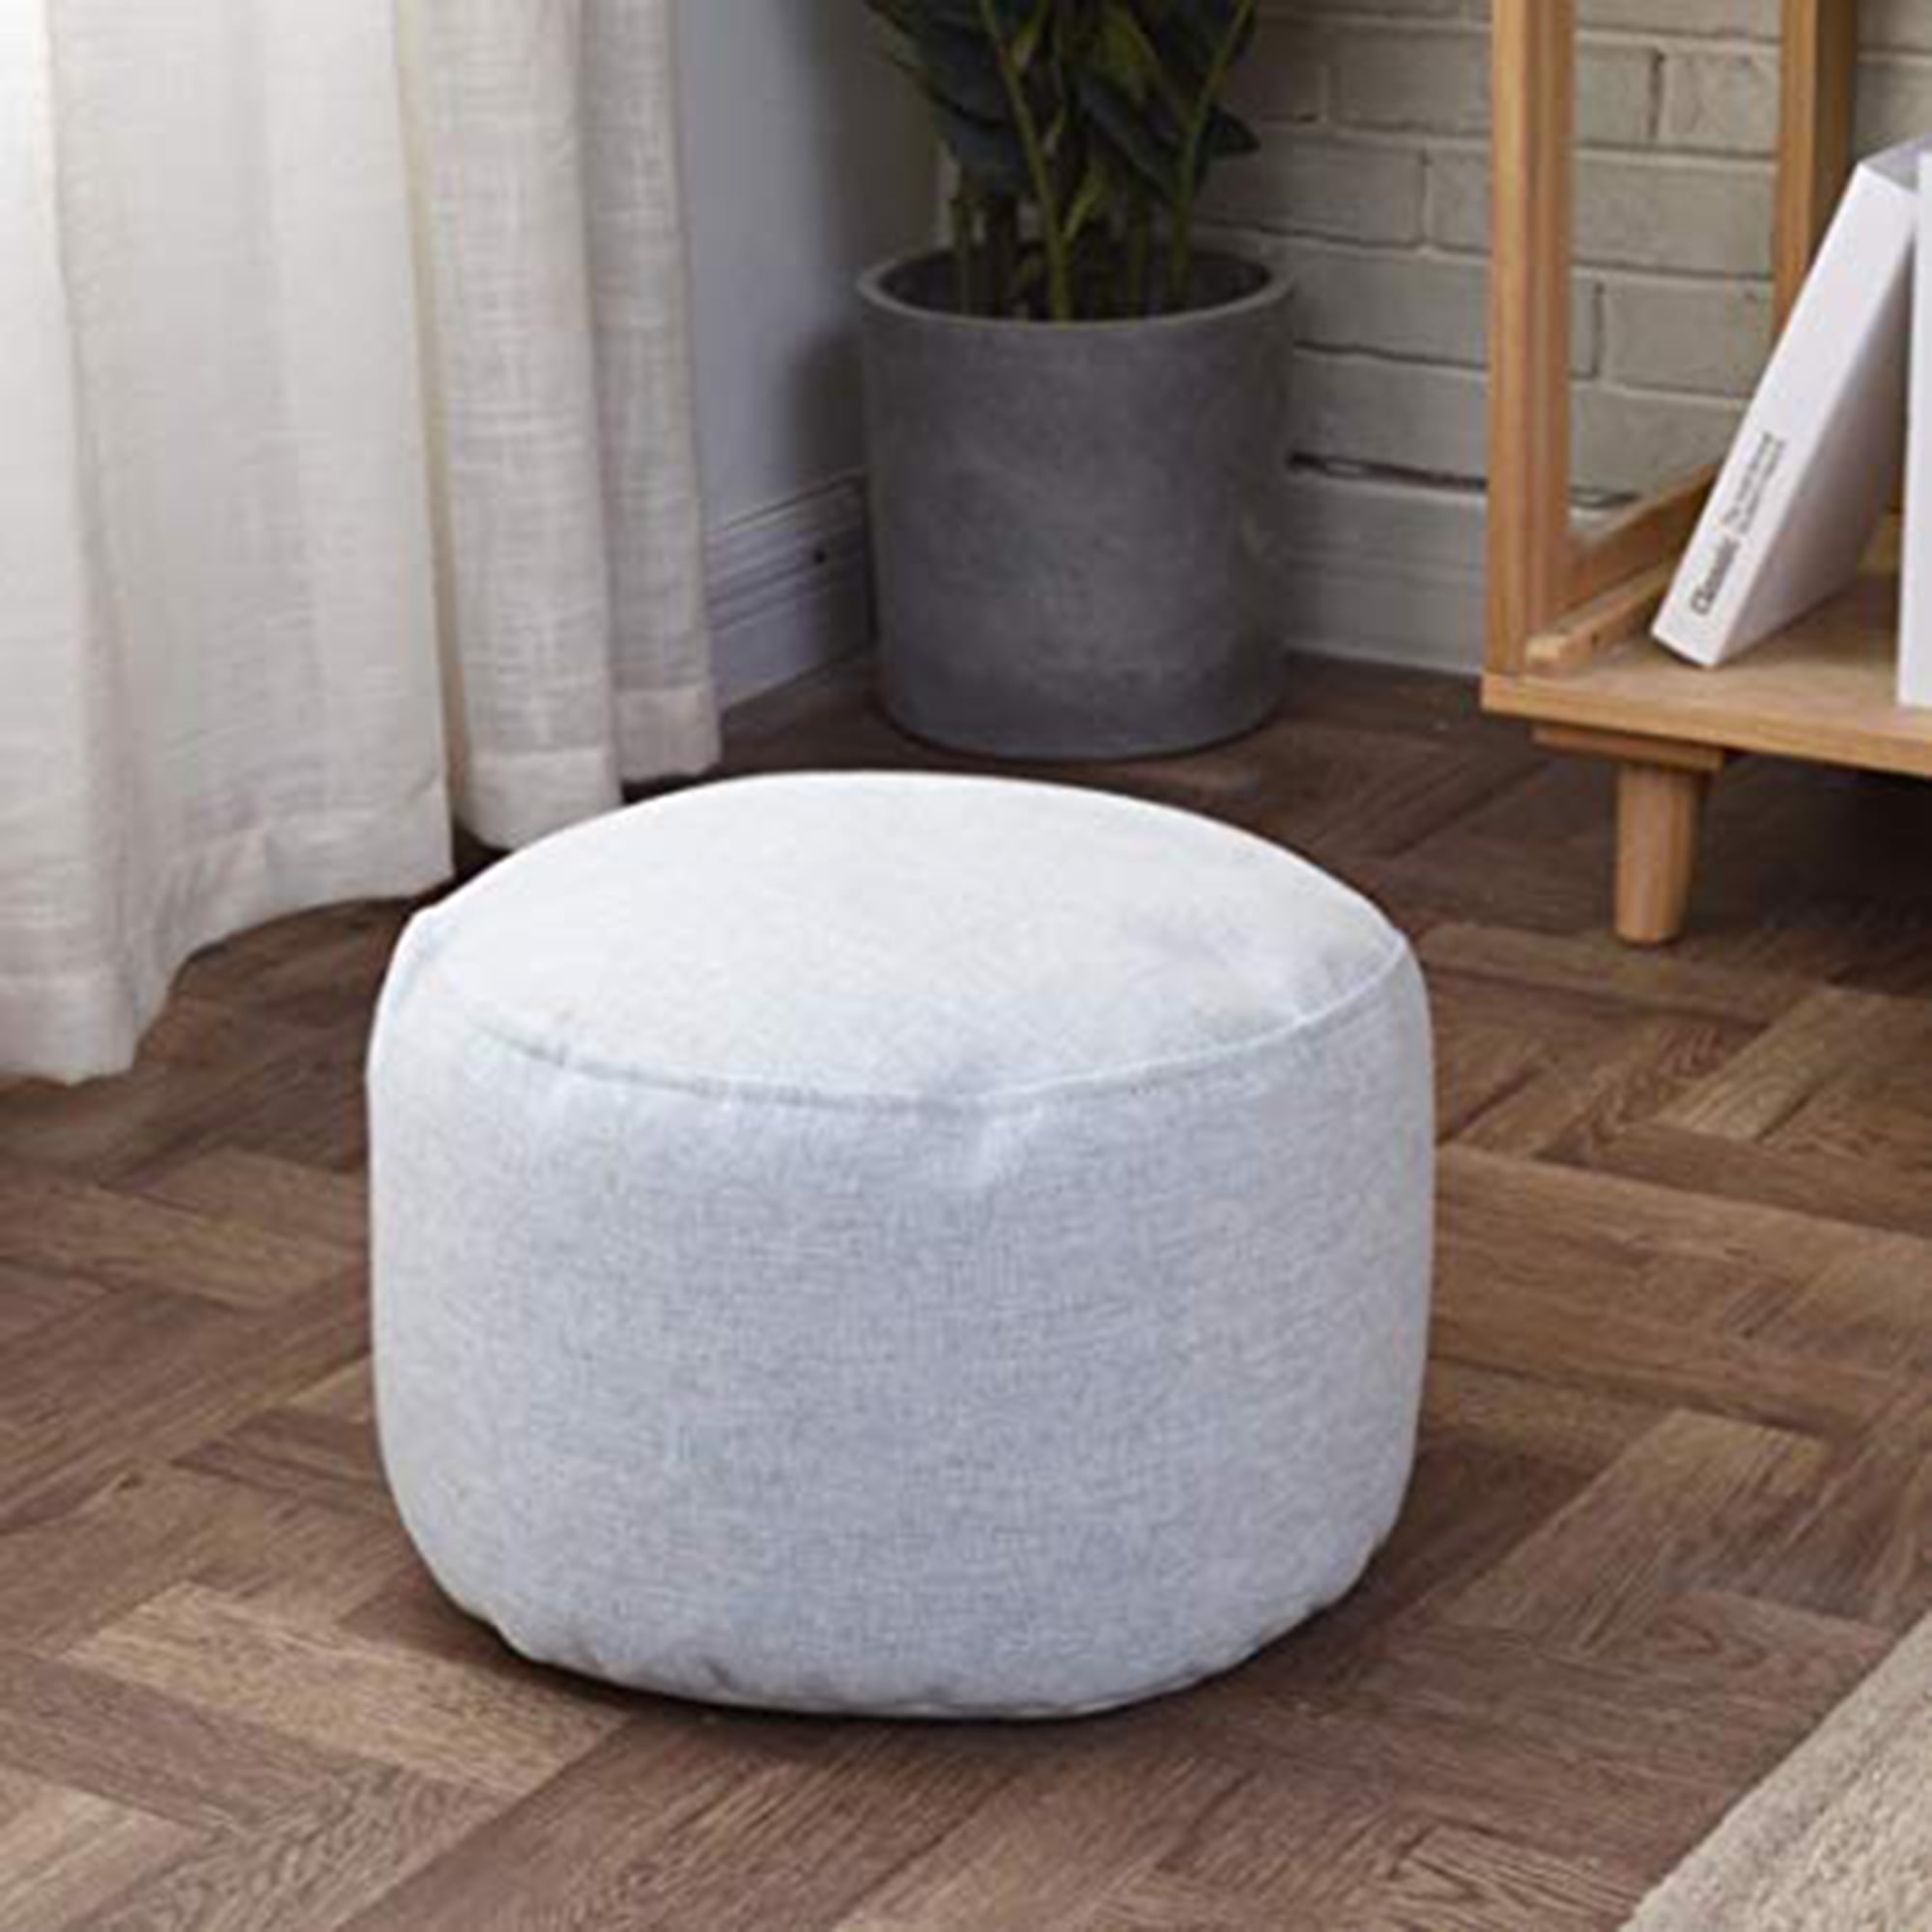 Lelinta Round Ottoman Foot Rest Cover, Round Living Room Chair Cover